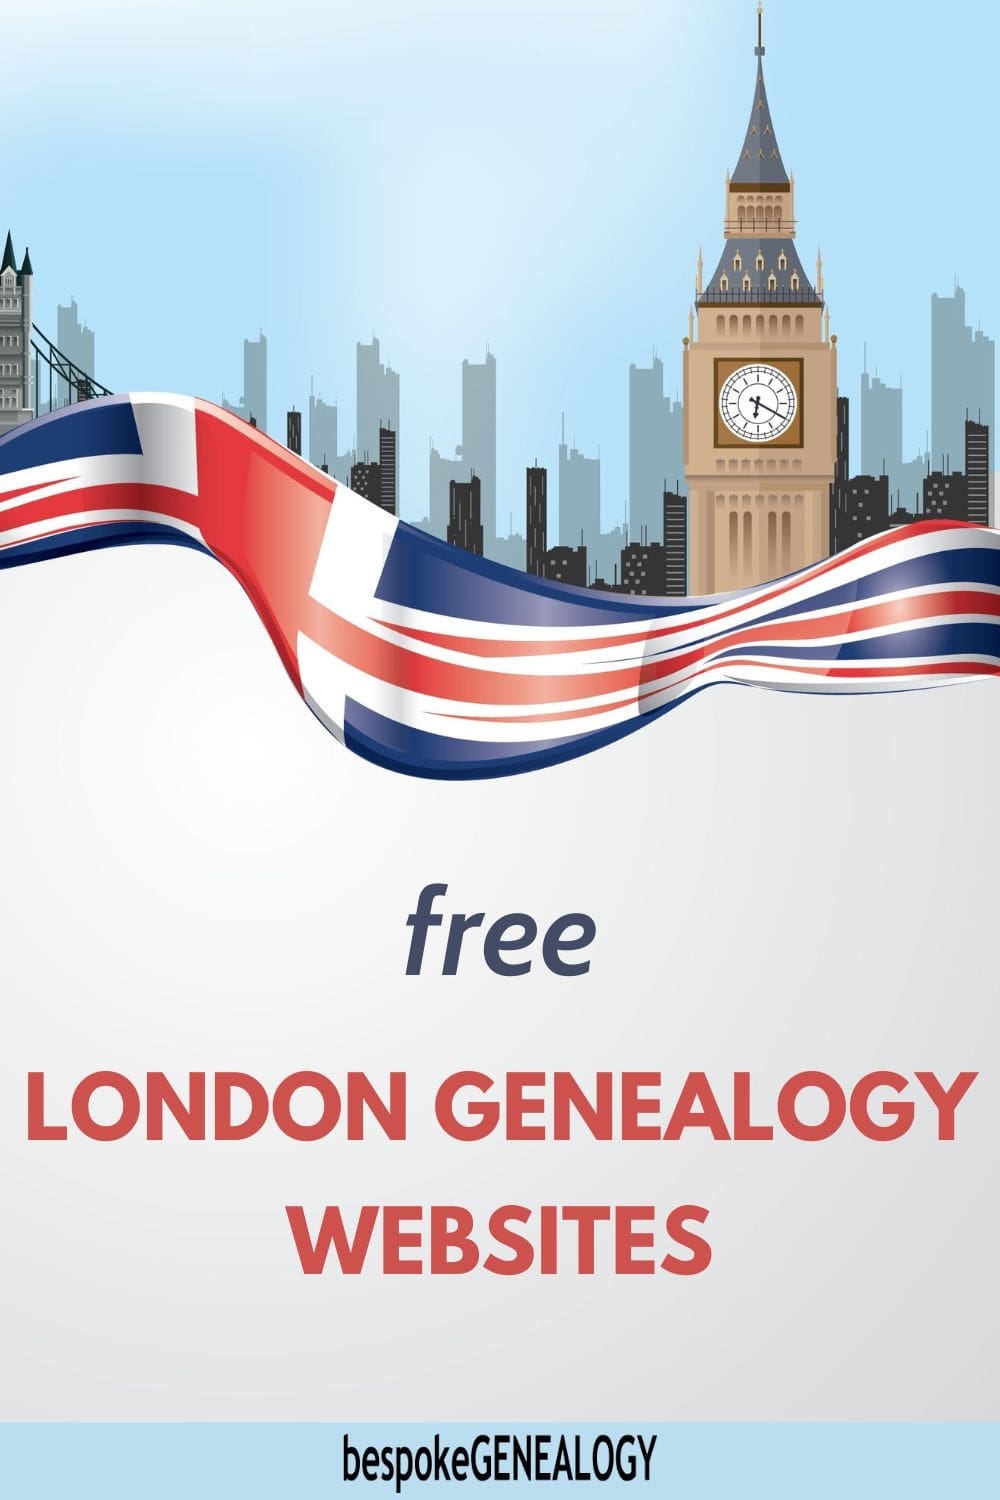 Pinterest pin. Free London genealogy websites. Graphic of the London cityscape wrapped in a Union flag.